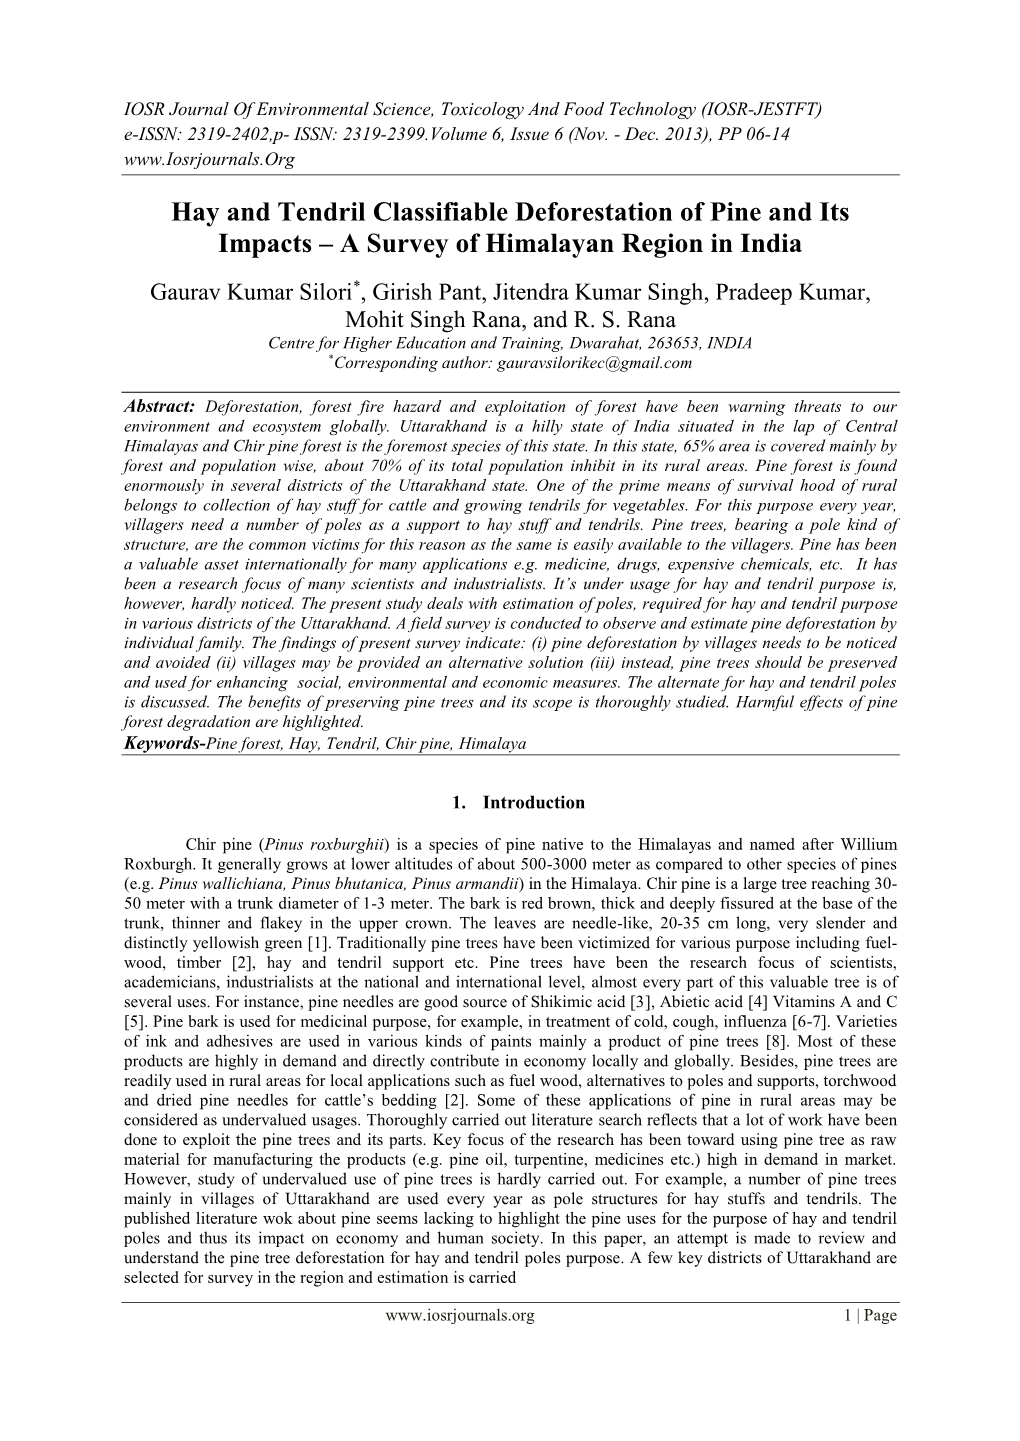 Hay and Tendril Classifiable Deforestation of Pine and Its Impacts – a Survey of Himalayan Region in India